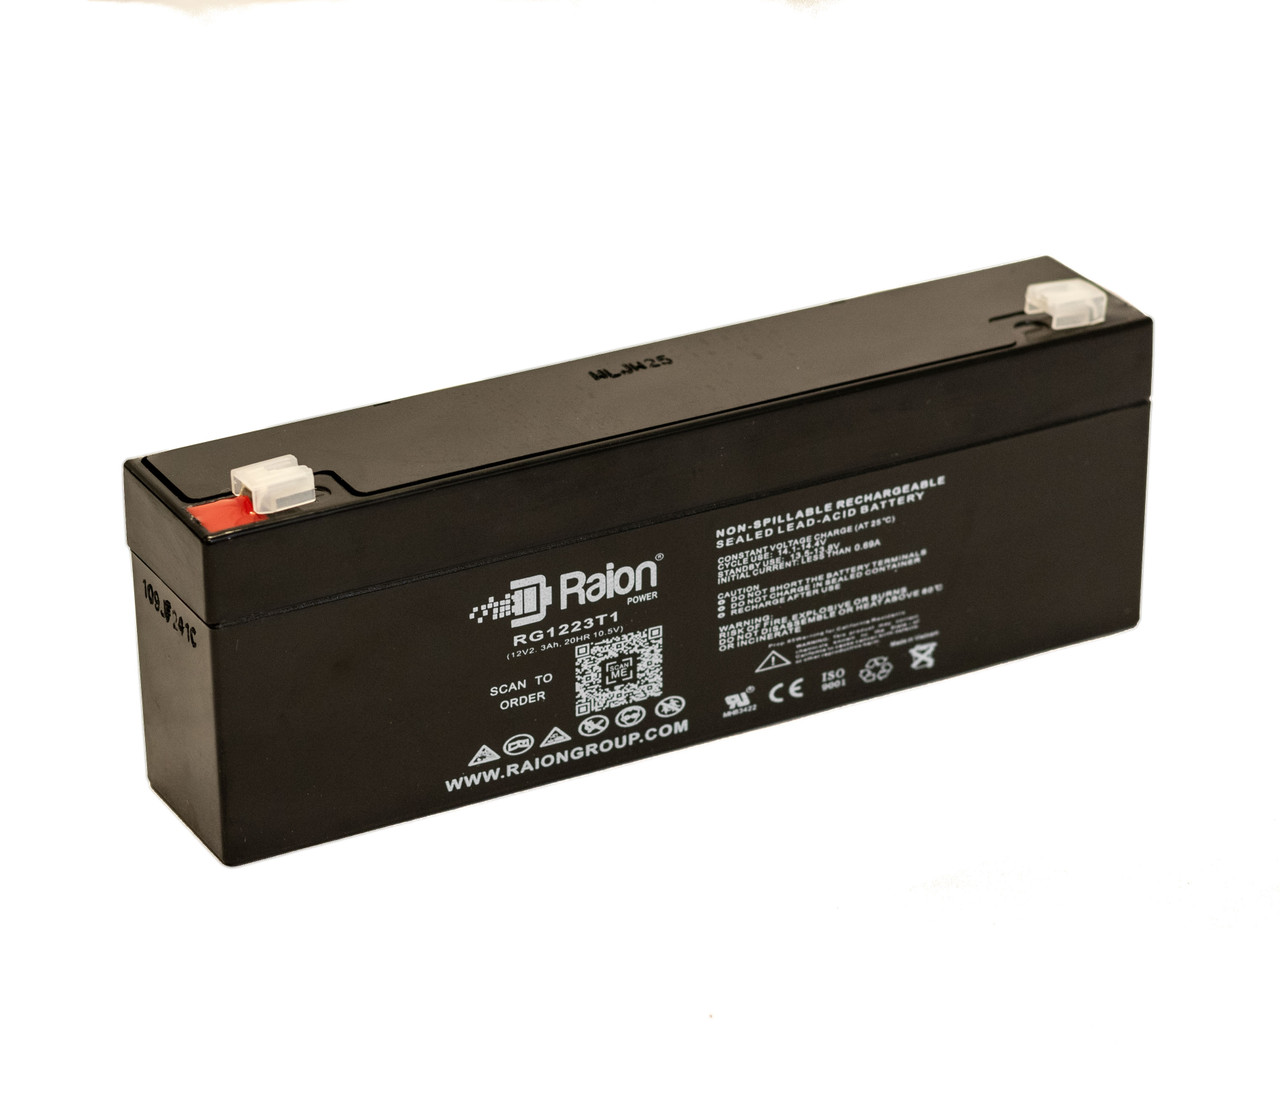 Raion Power RG1223T1 Replacement Battery for Intermec/Norand NT121